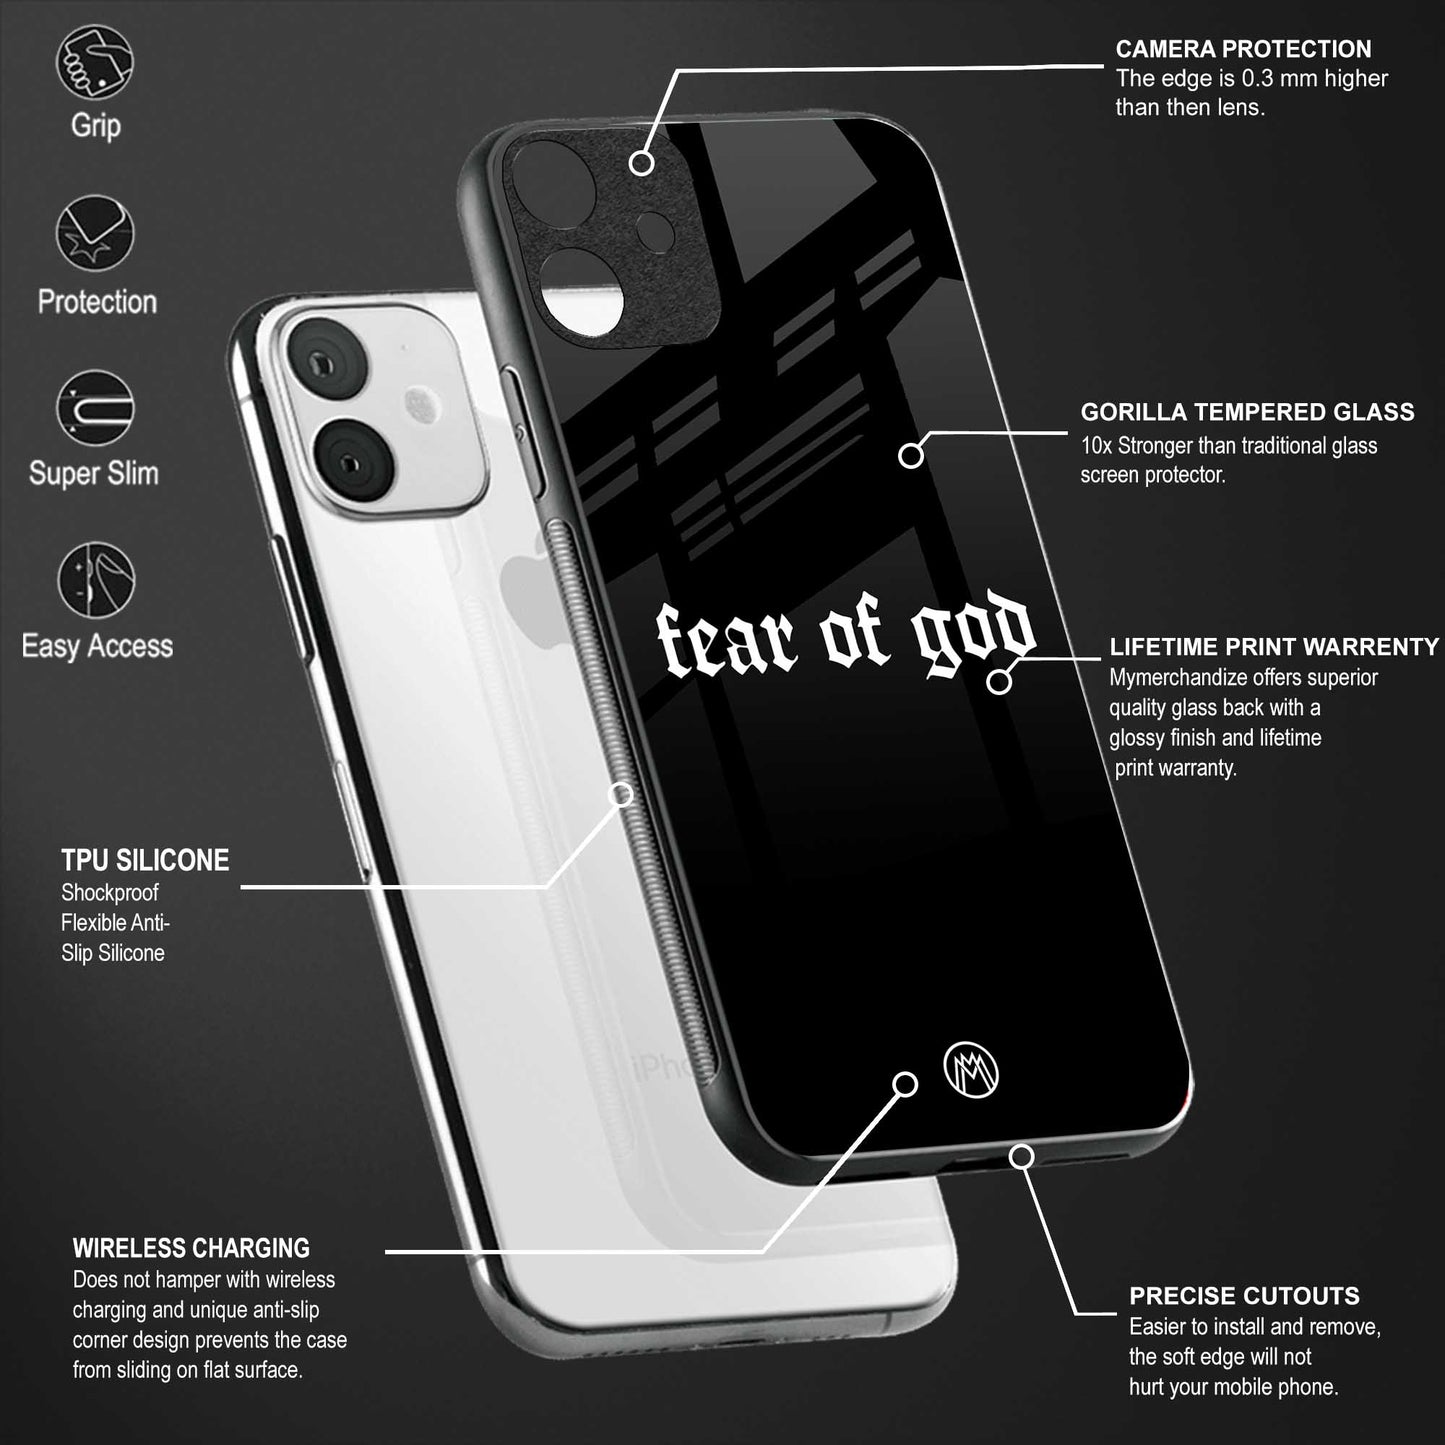 fear of god phone cover for vivo y95